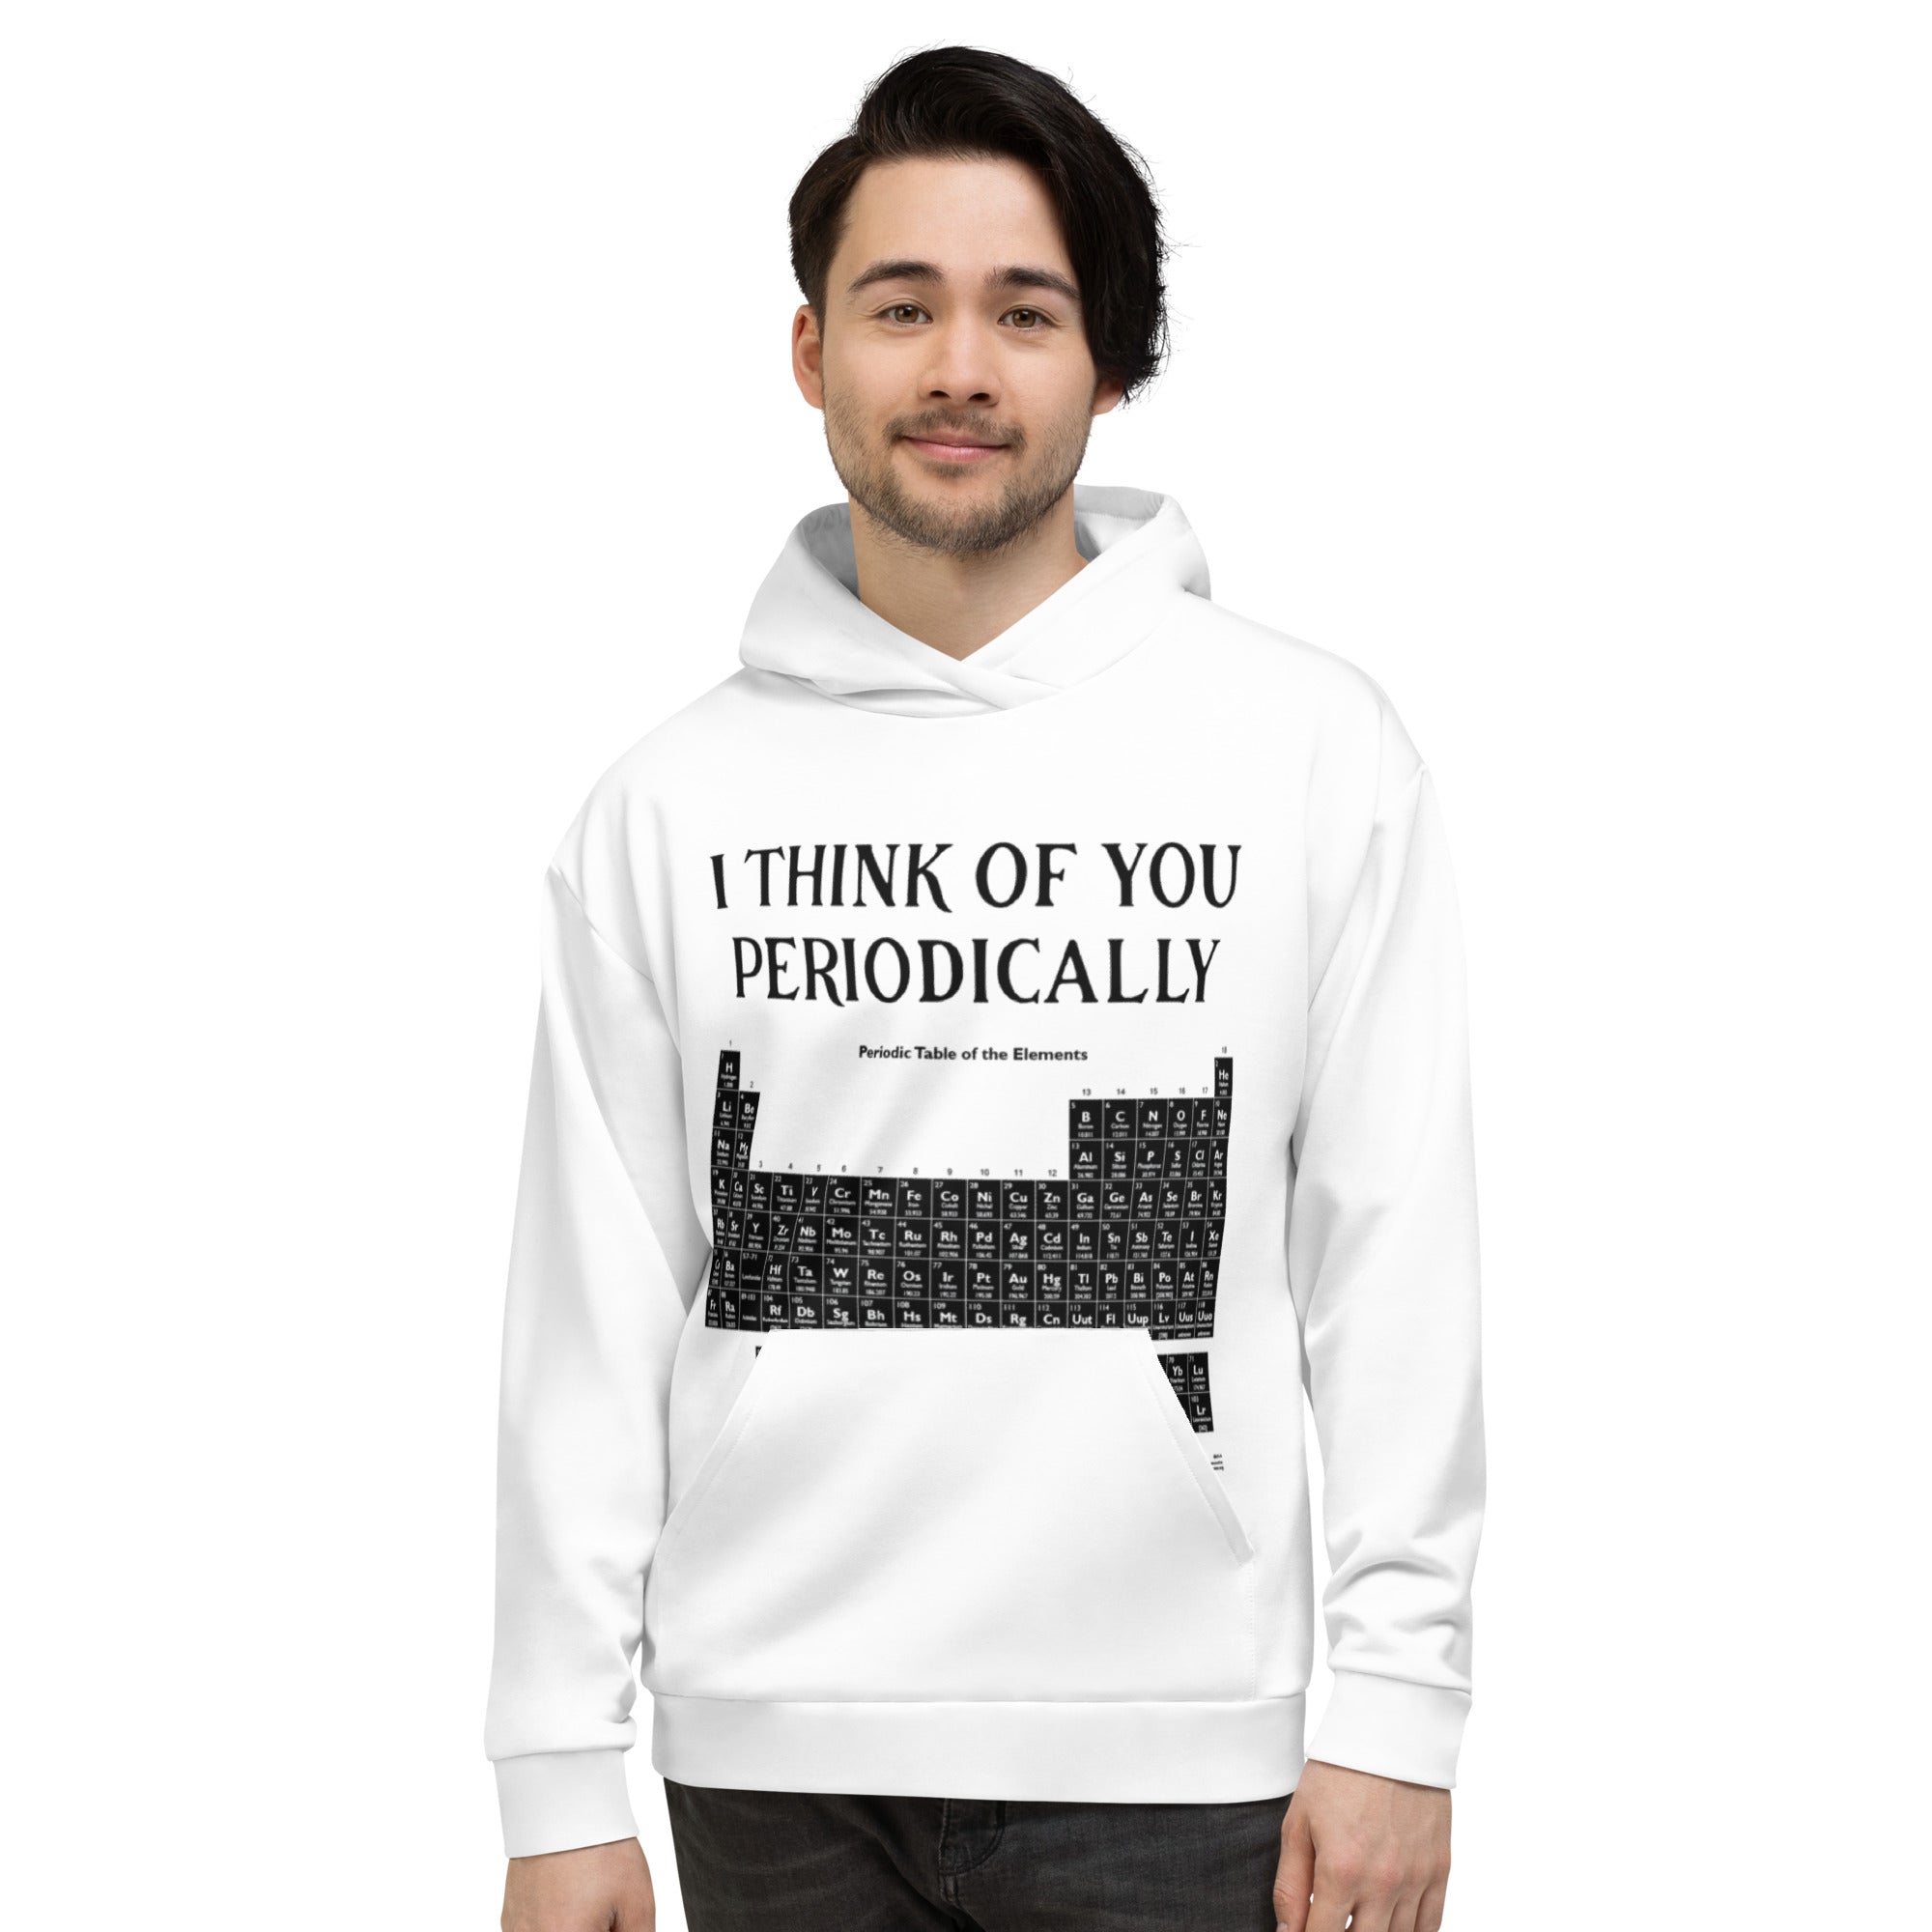 I think of you PERIODICALLY Unisex Hoodie